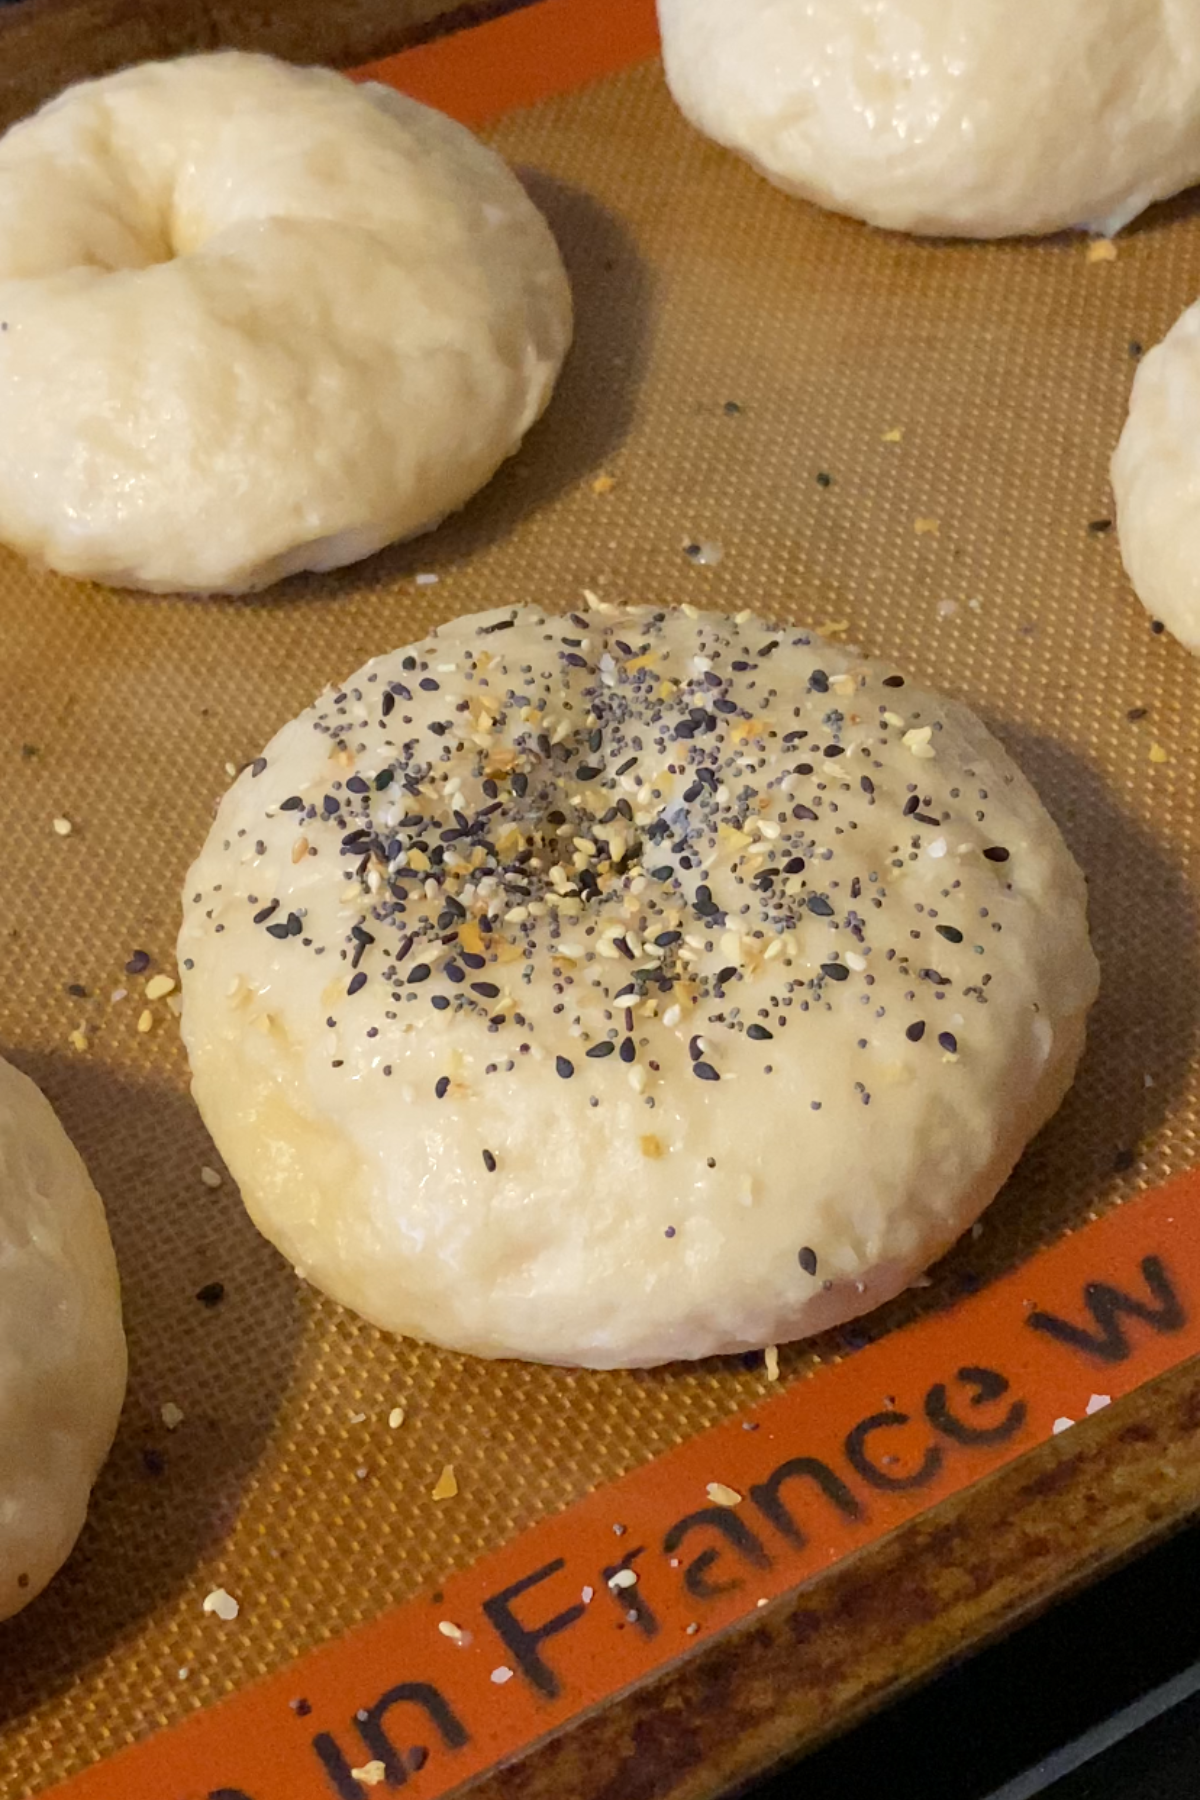 Decorating bagels with toppings.